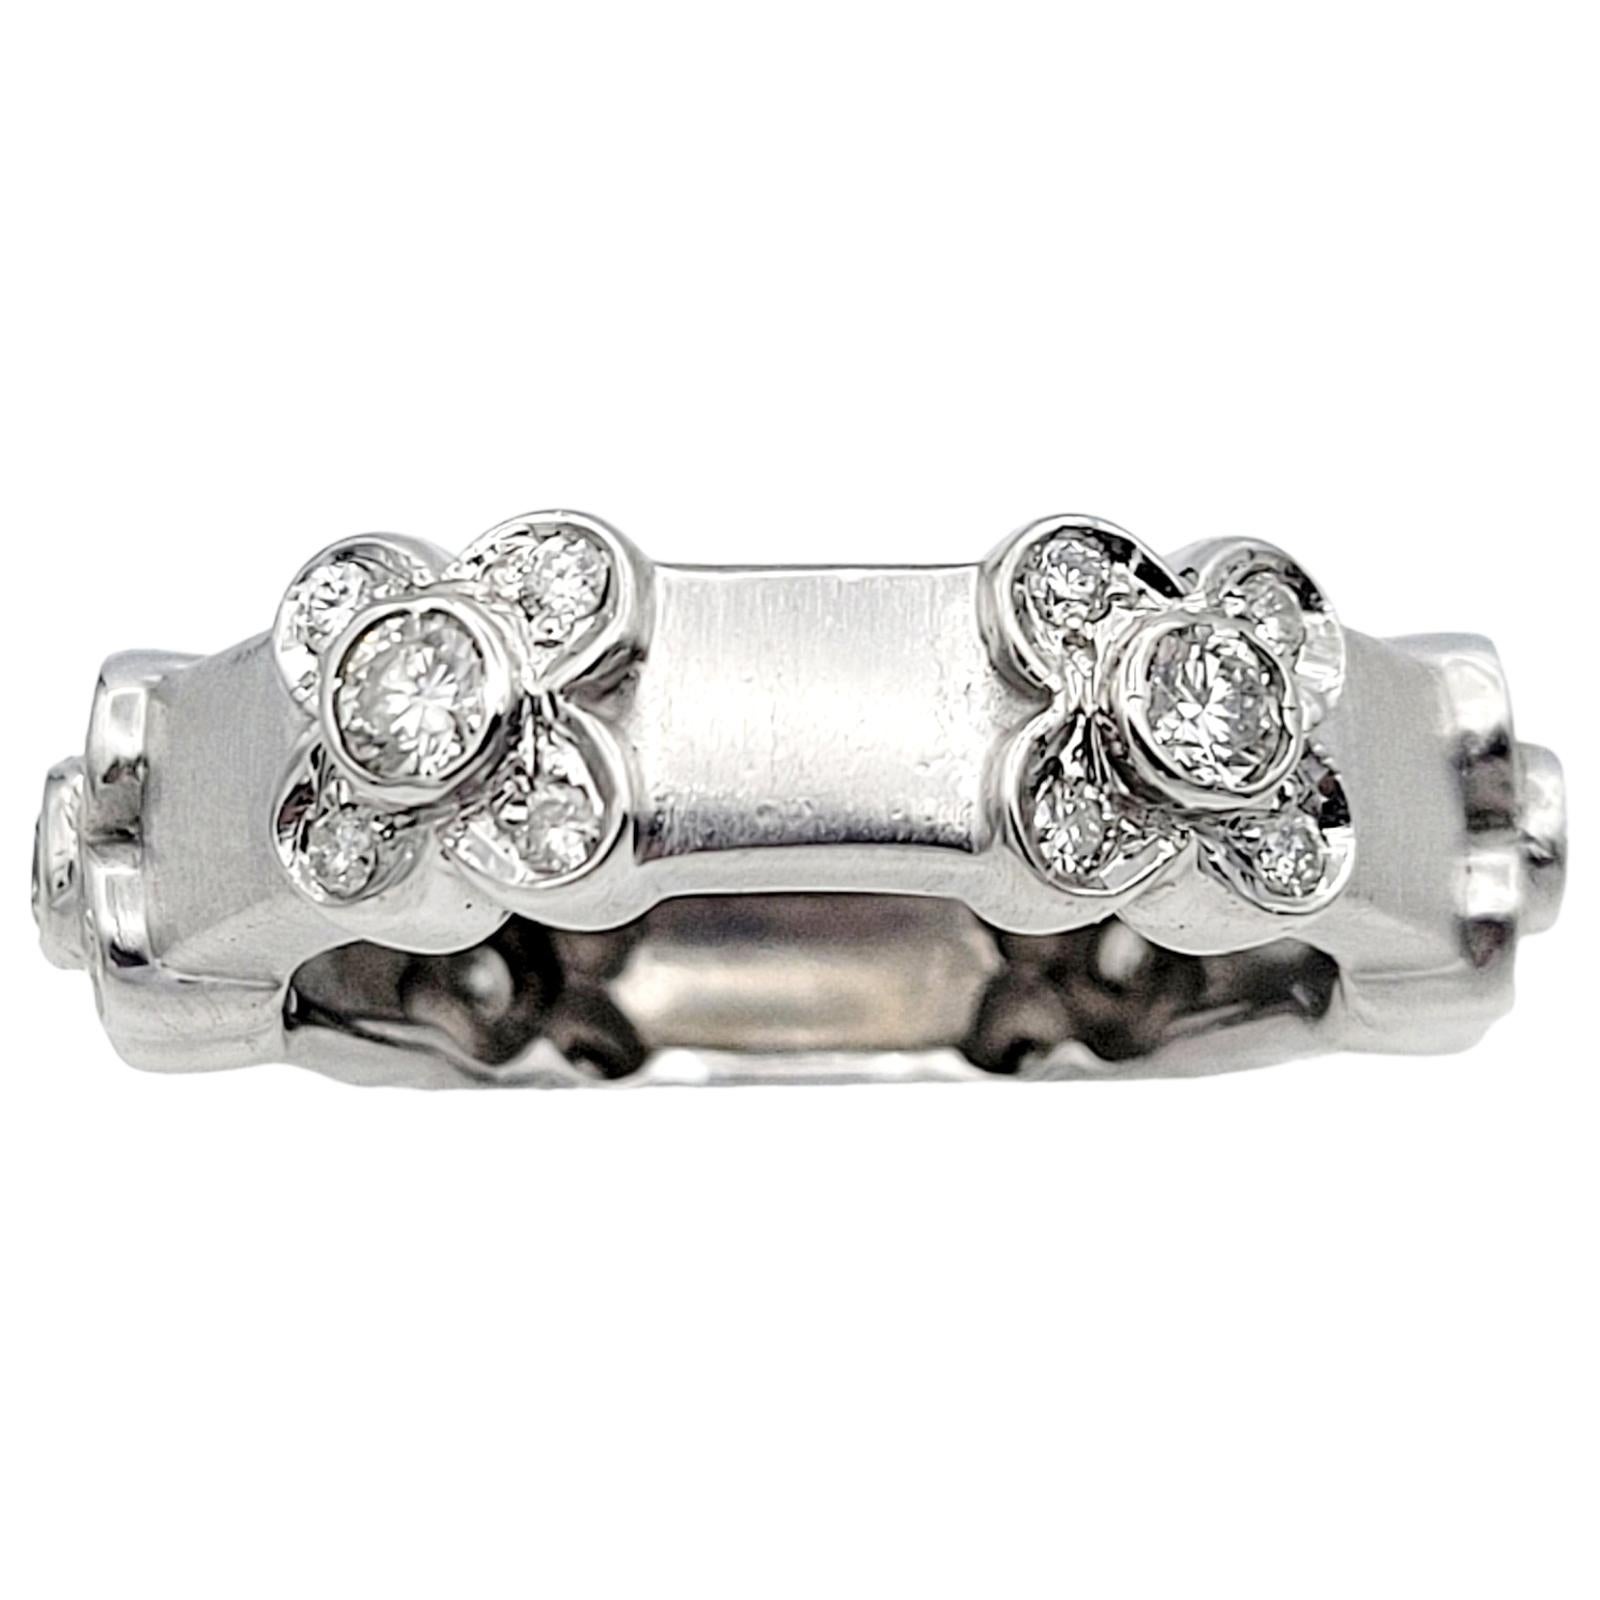 Ring Size 6.5

We absolutely adore this amazing 14 karat white gold diamond flower station ring. Delicately crafted, this captivating and contemporary piece features six meticulously arranged flower motifs, each adorned with five bezel-set natural